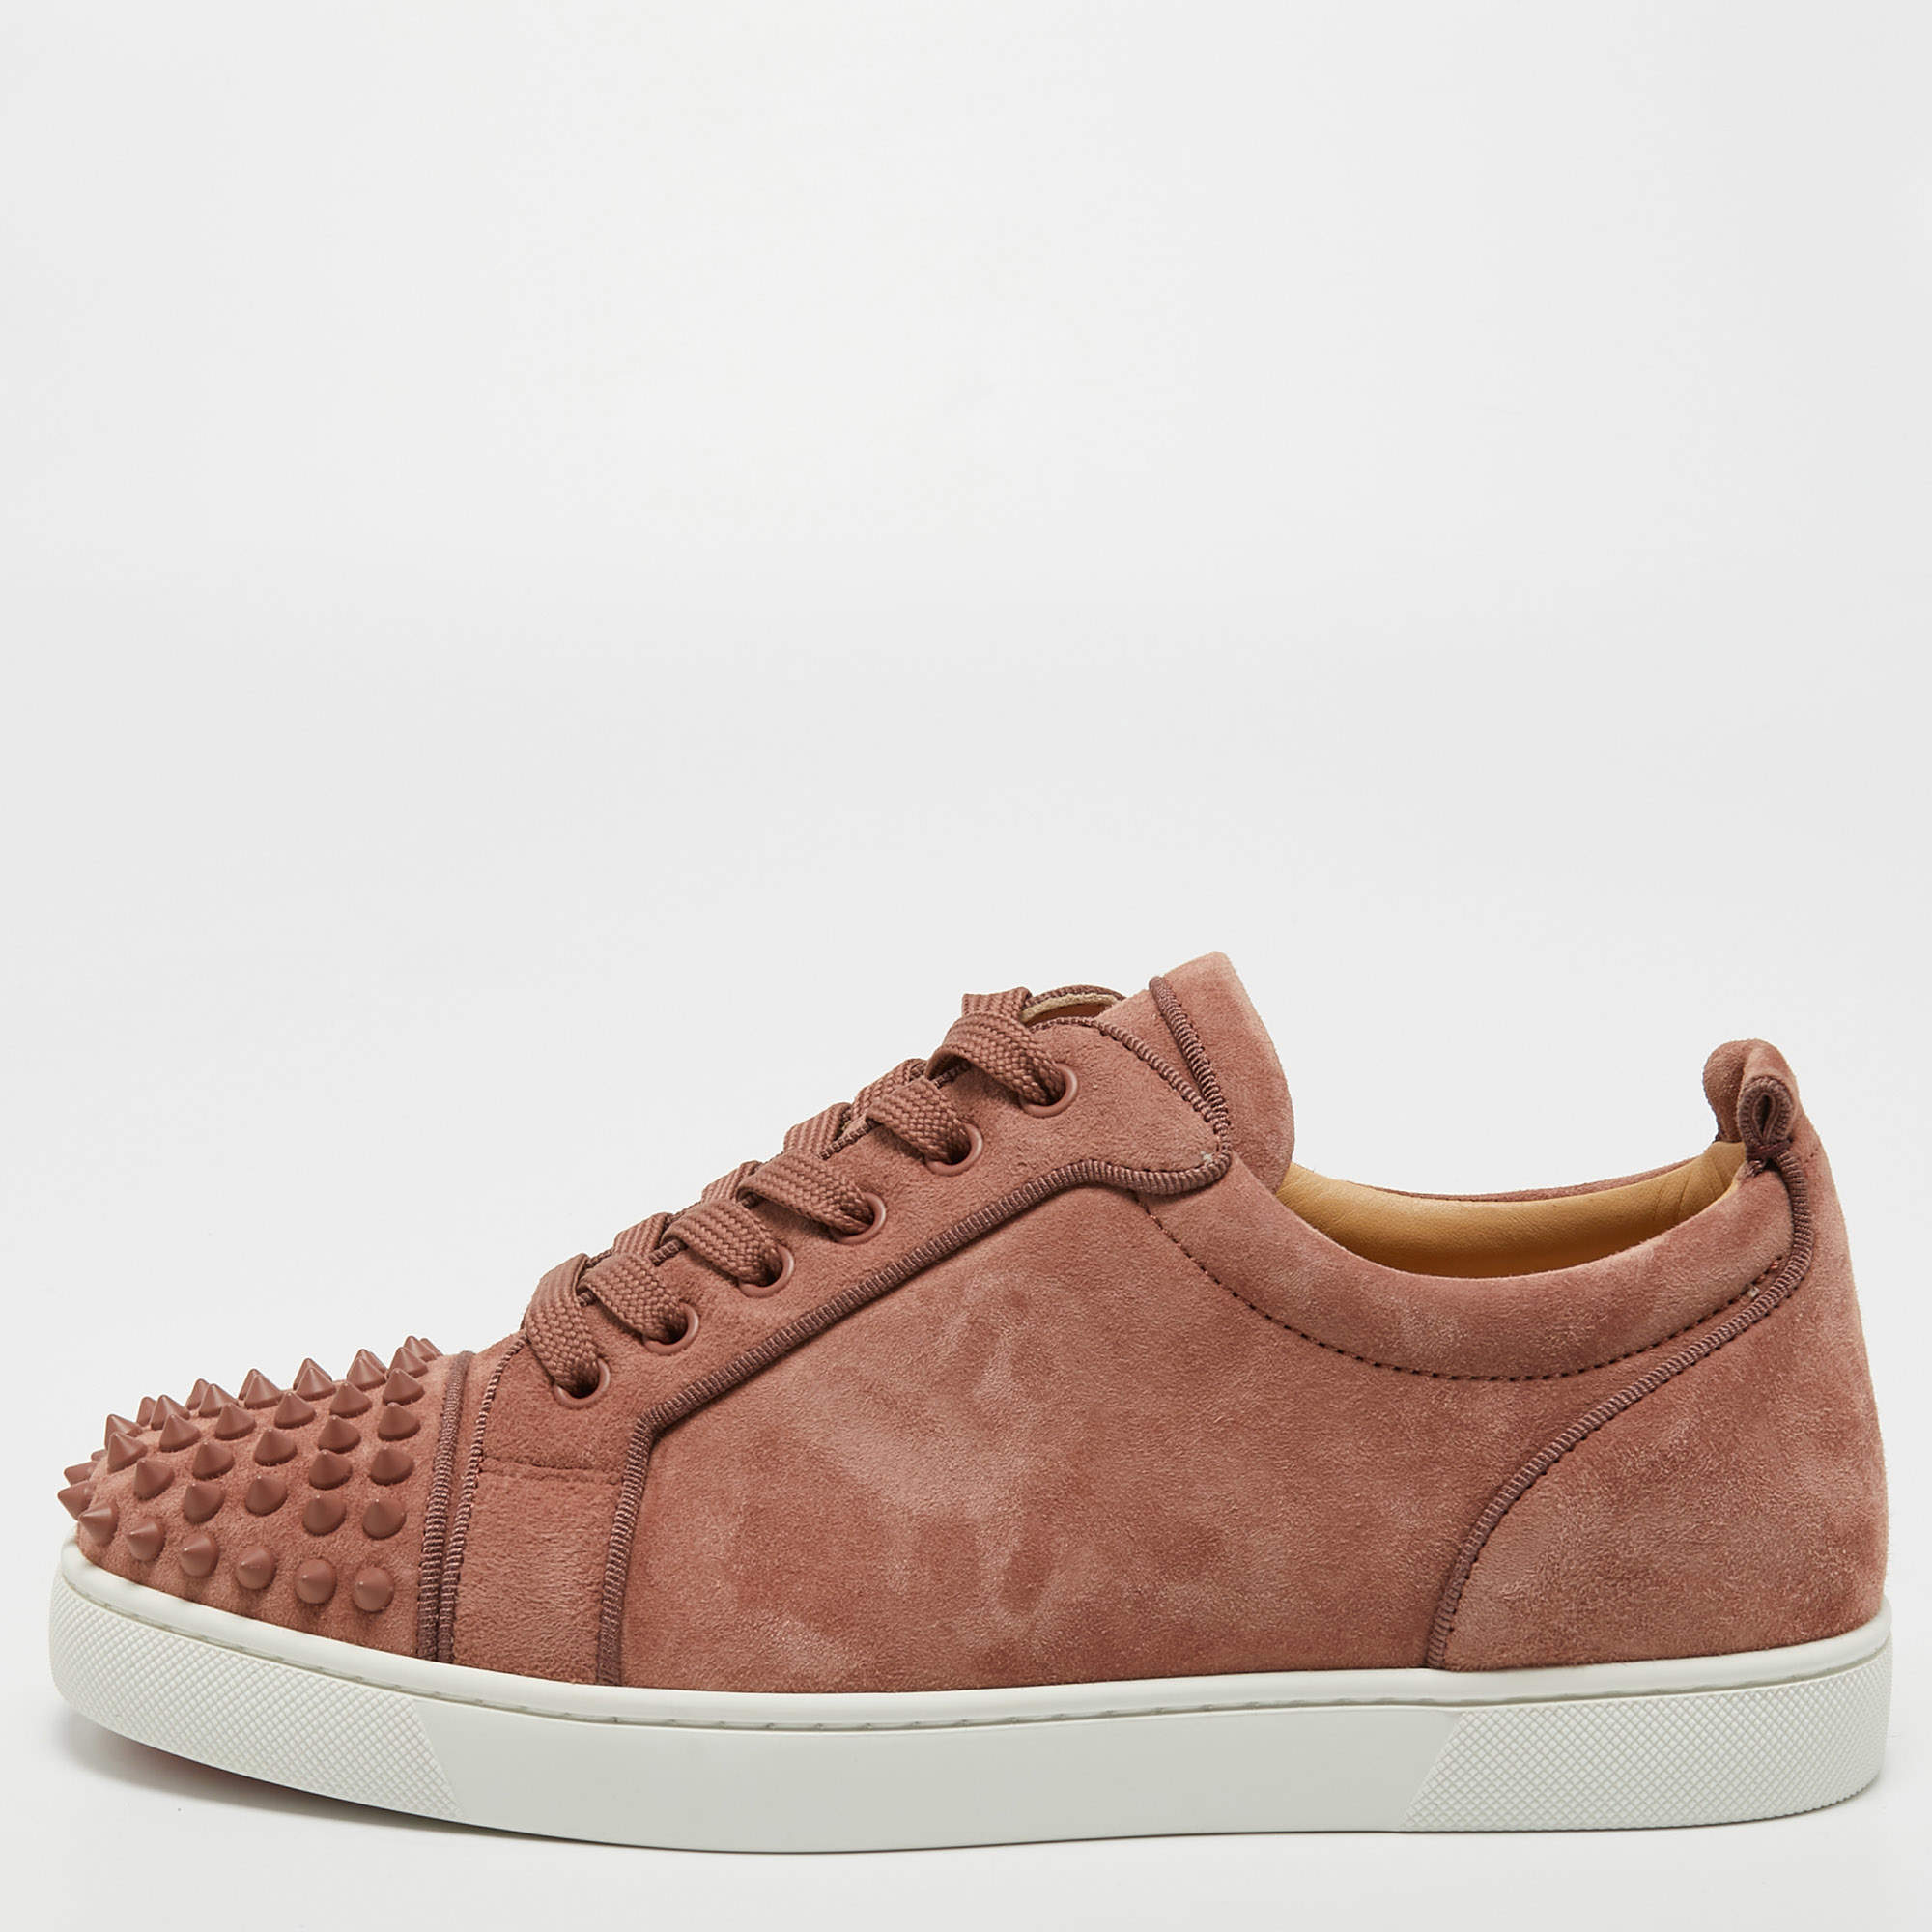 Christian Louboutin Pink Suede Louis Junior Sneakers Size 40